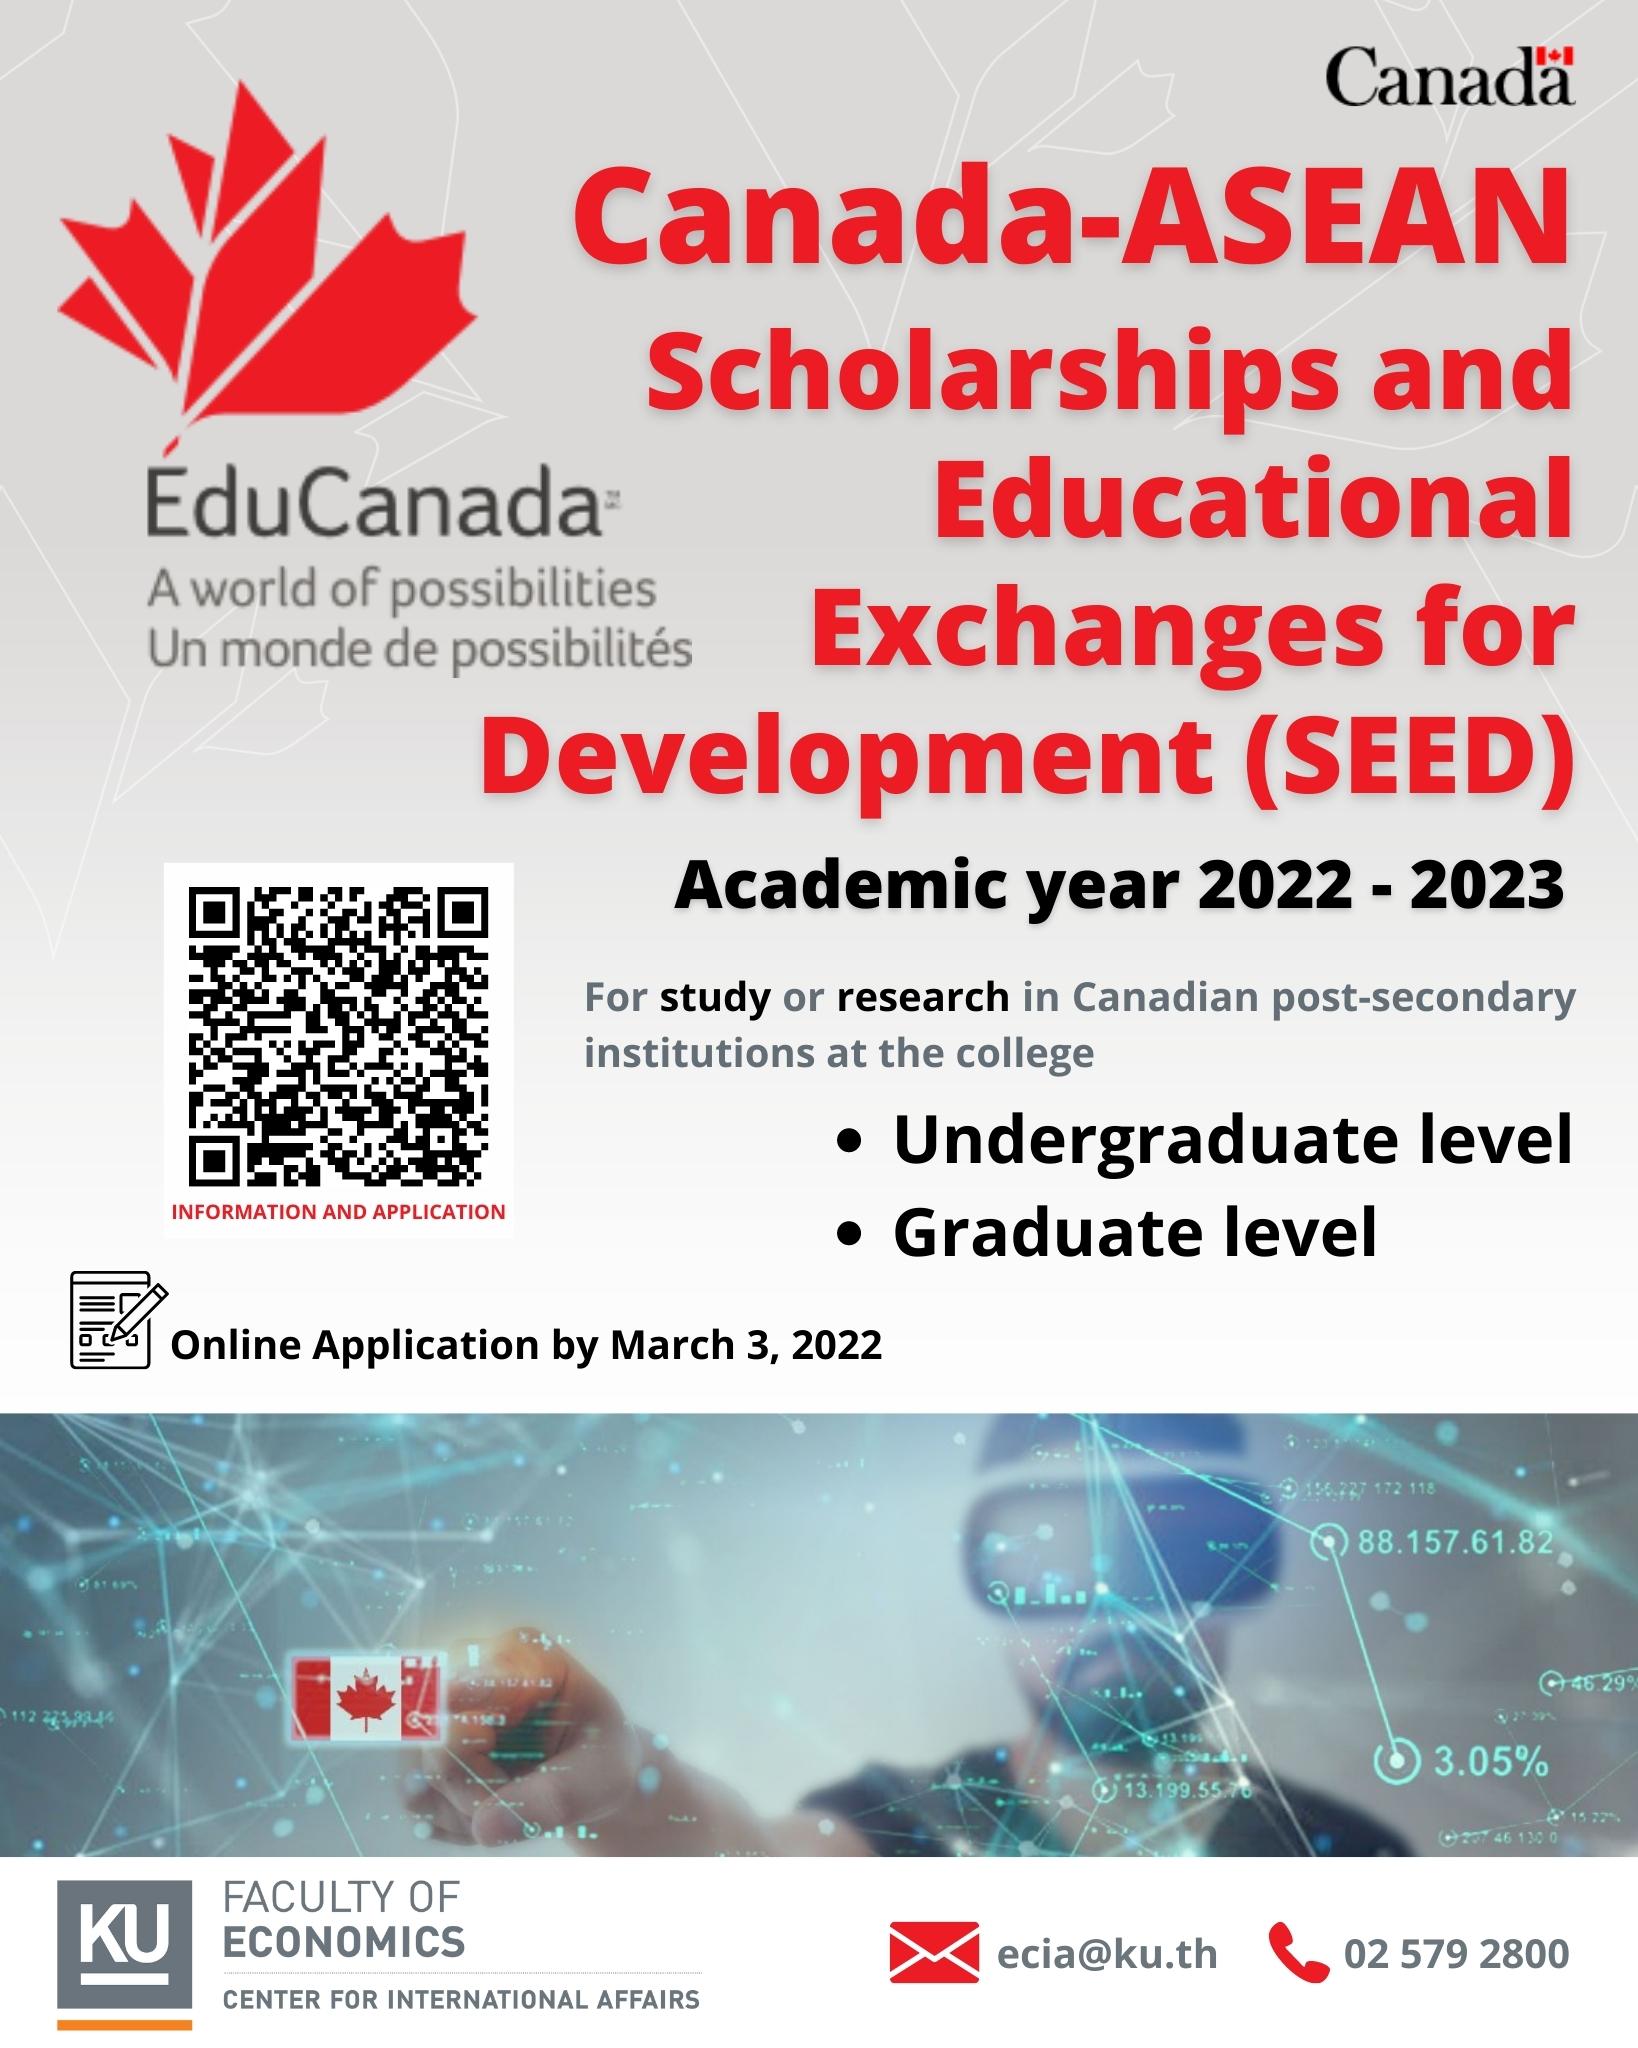 Canada-ASEAN Scholarships and Educational Exchanges for Development (SEED) 2022-2023